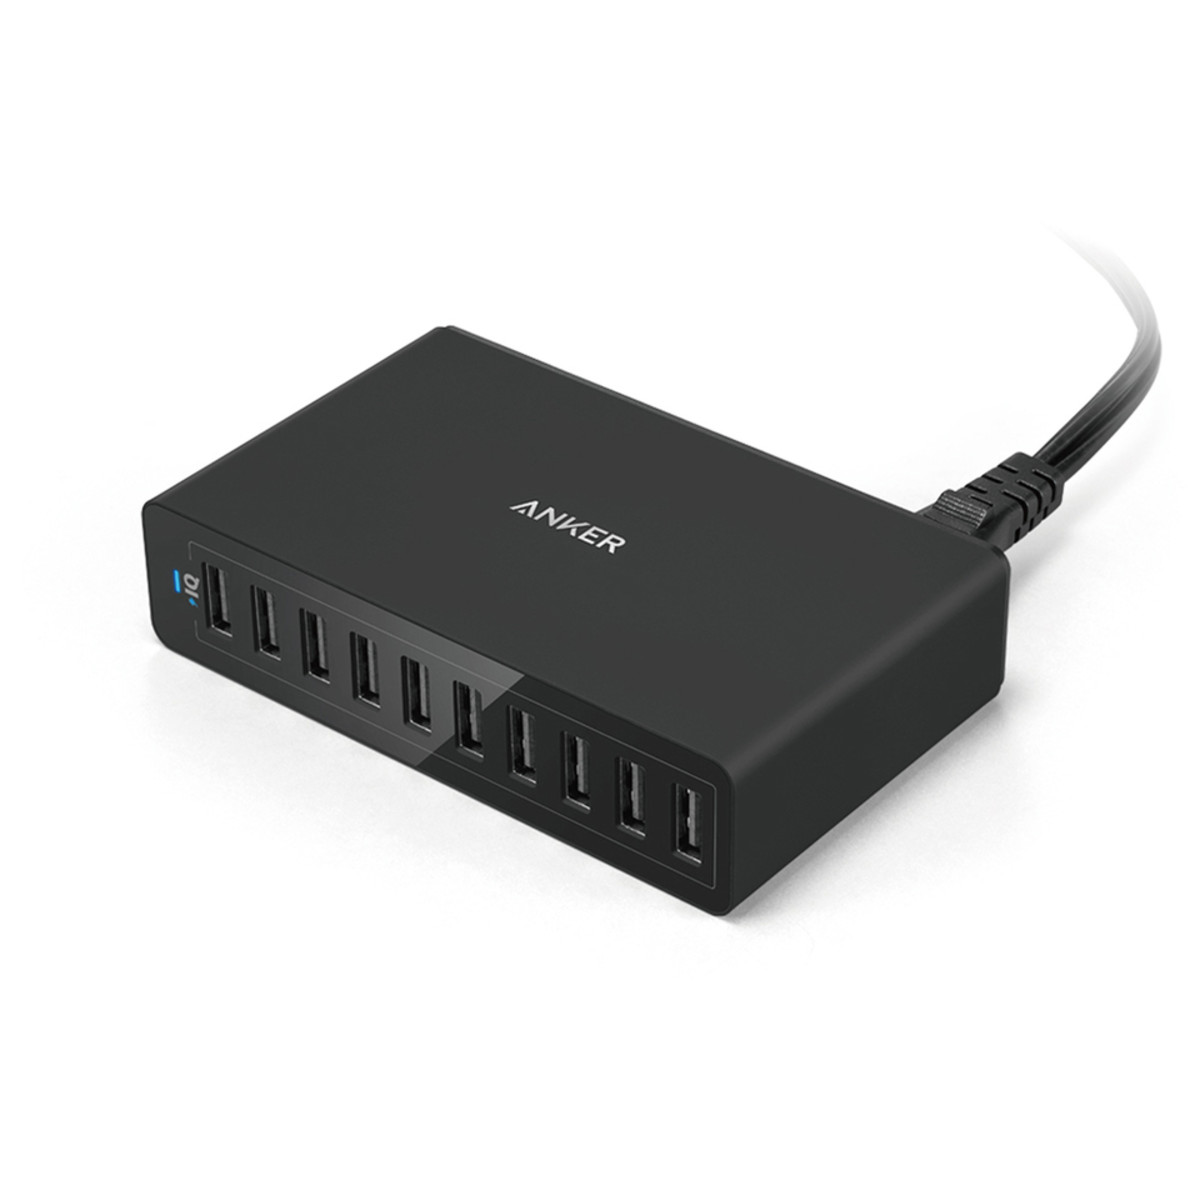 The Anker PowerPort 10 can charge up to 10 devices, and outputs up to 12 total amps of power.